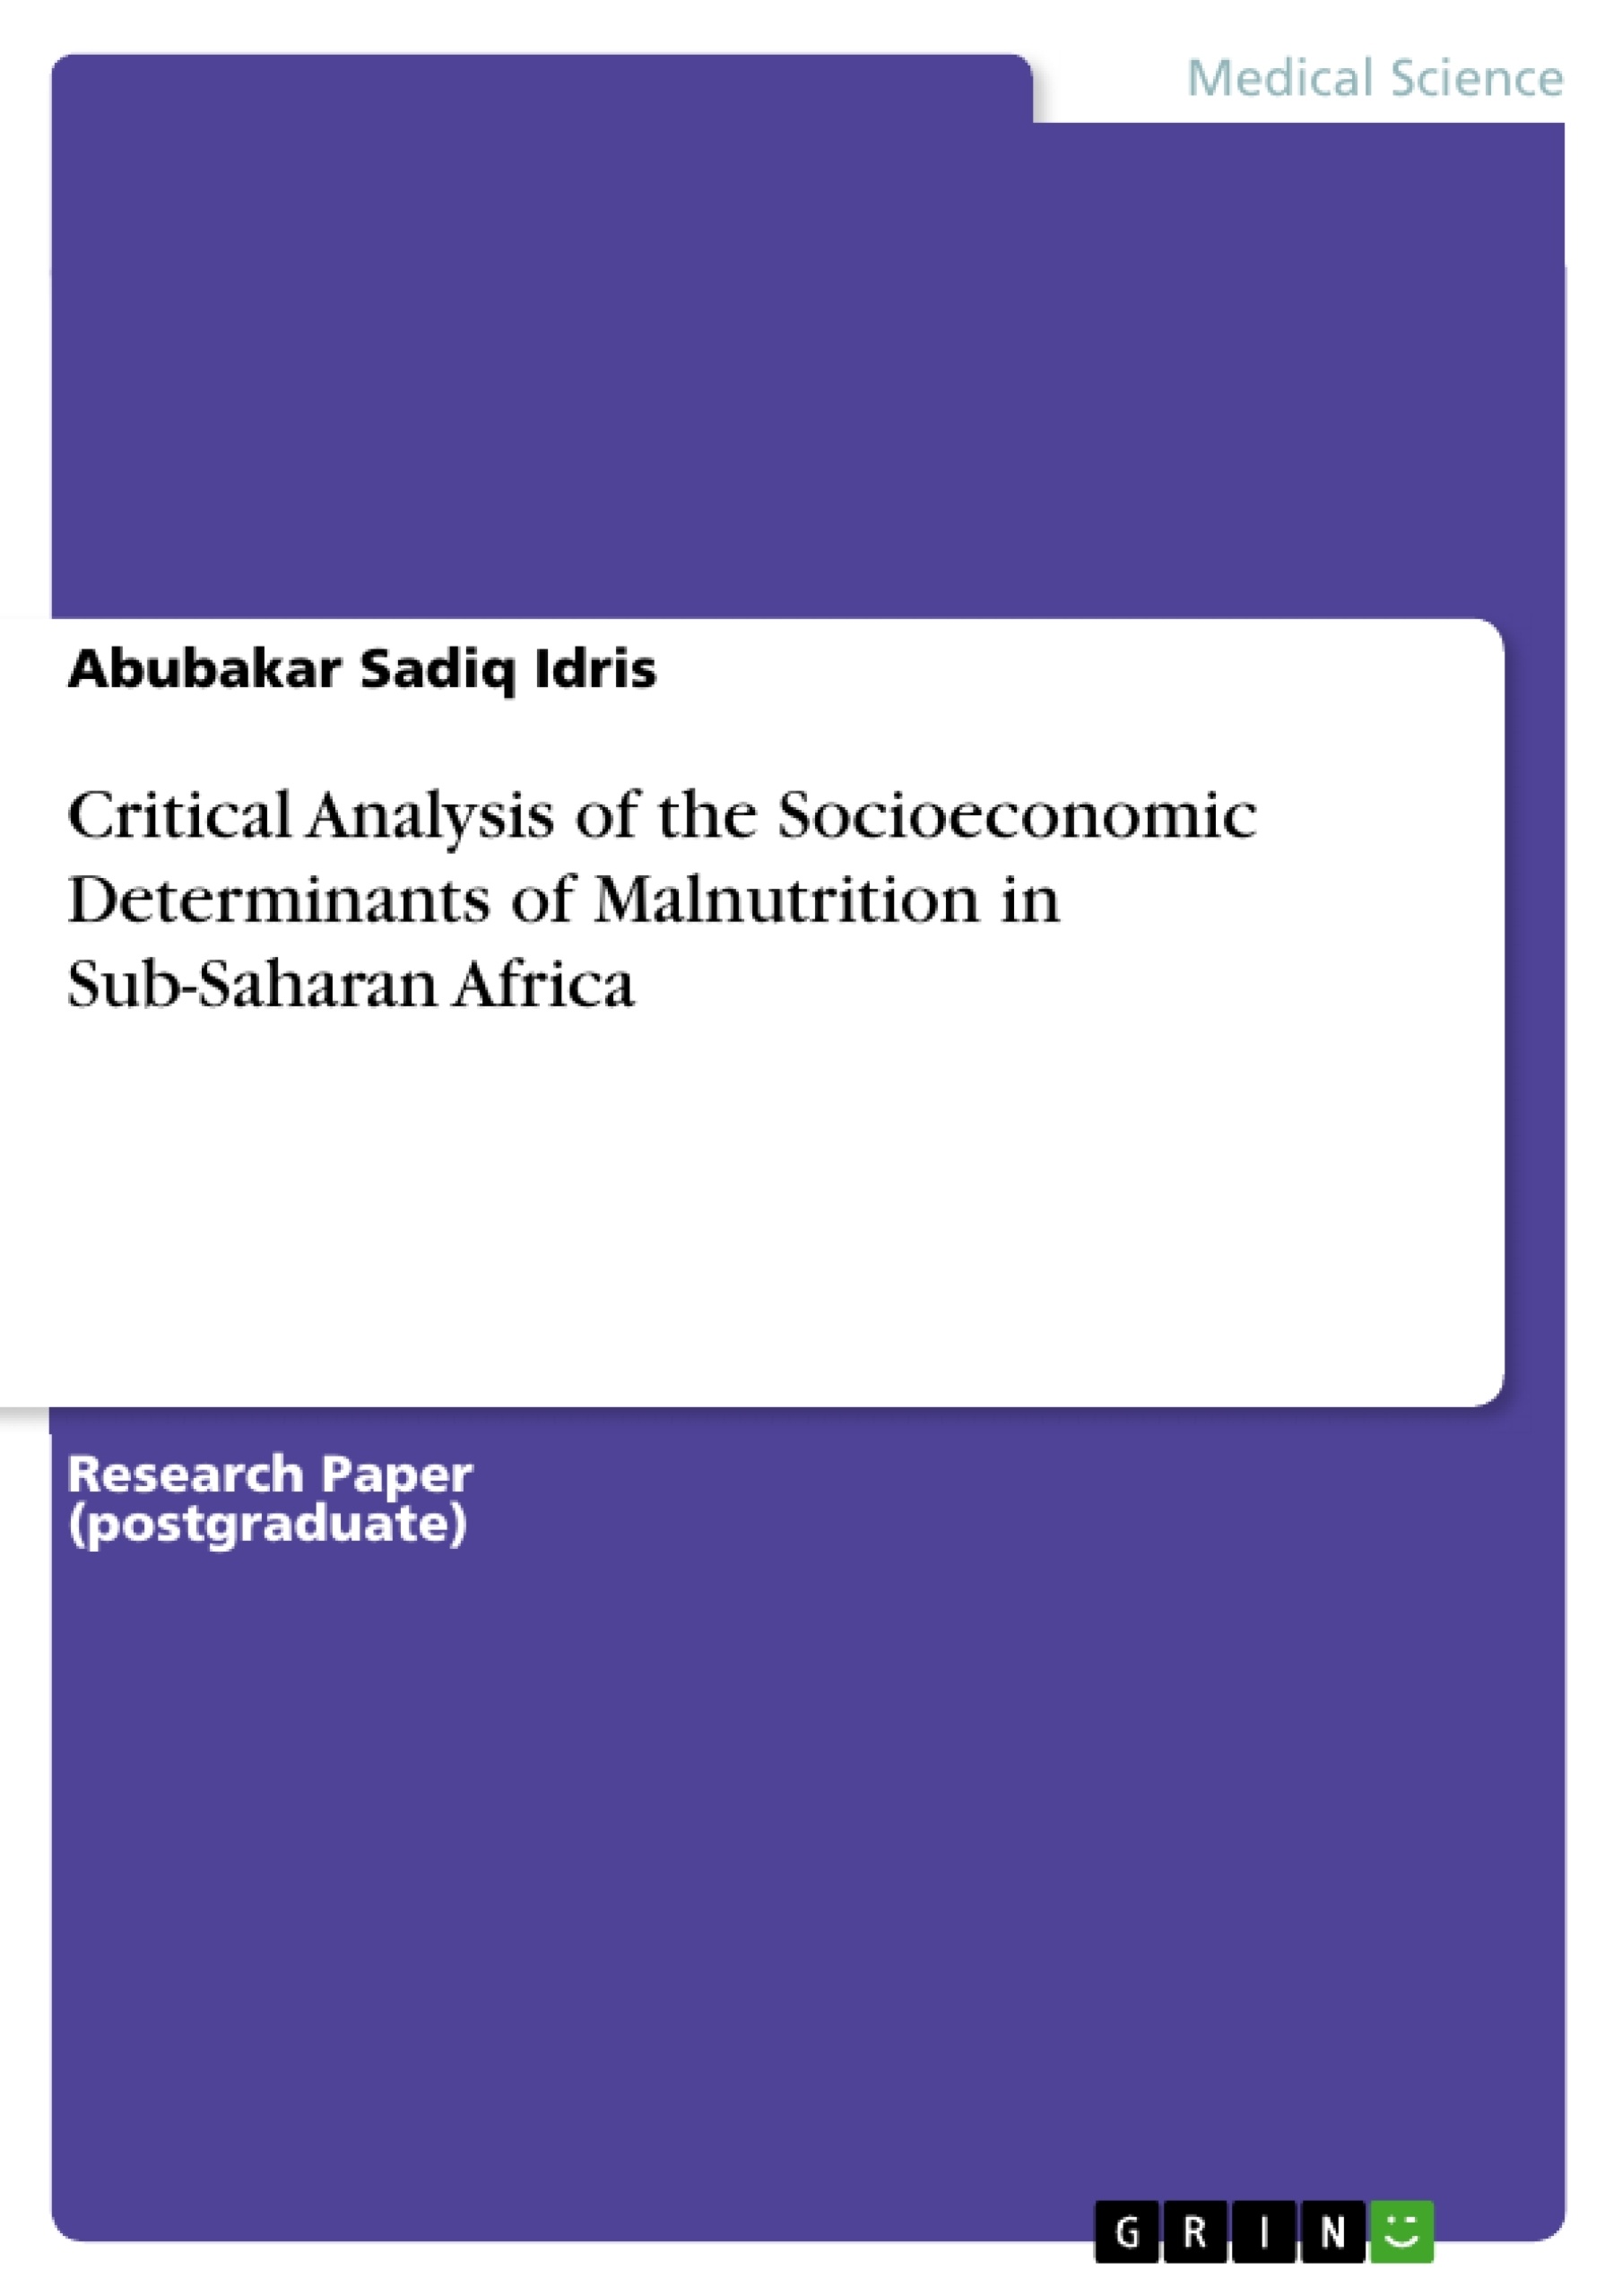 Title: Critical Analysis of the Socioeconomic Determinants of Malnutrition in Sub-Saharan Africa